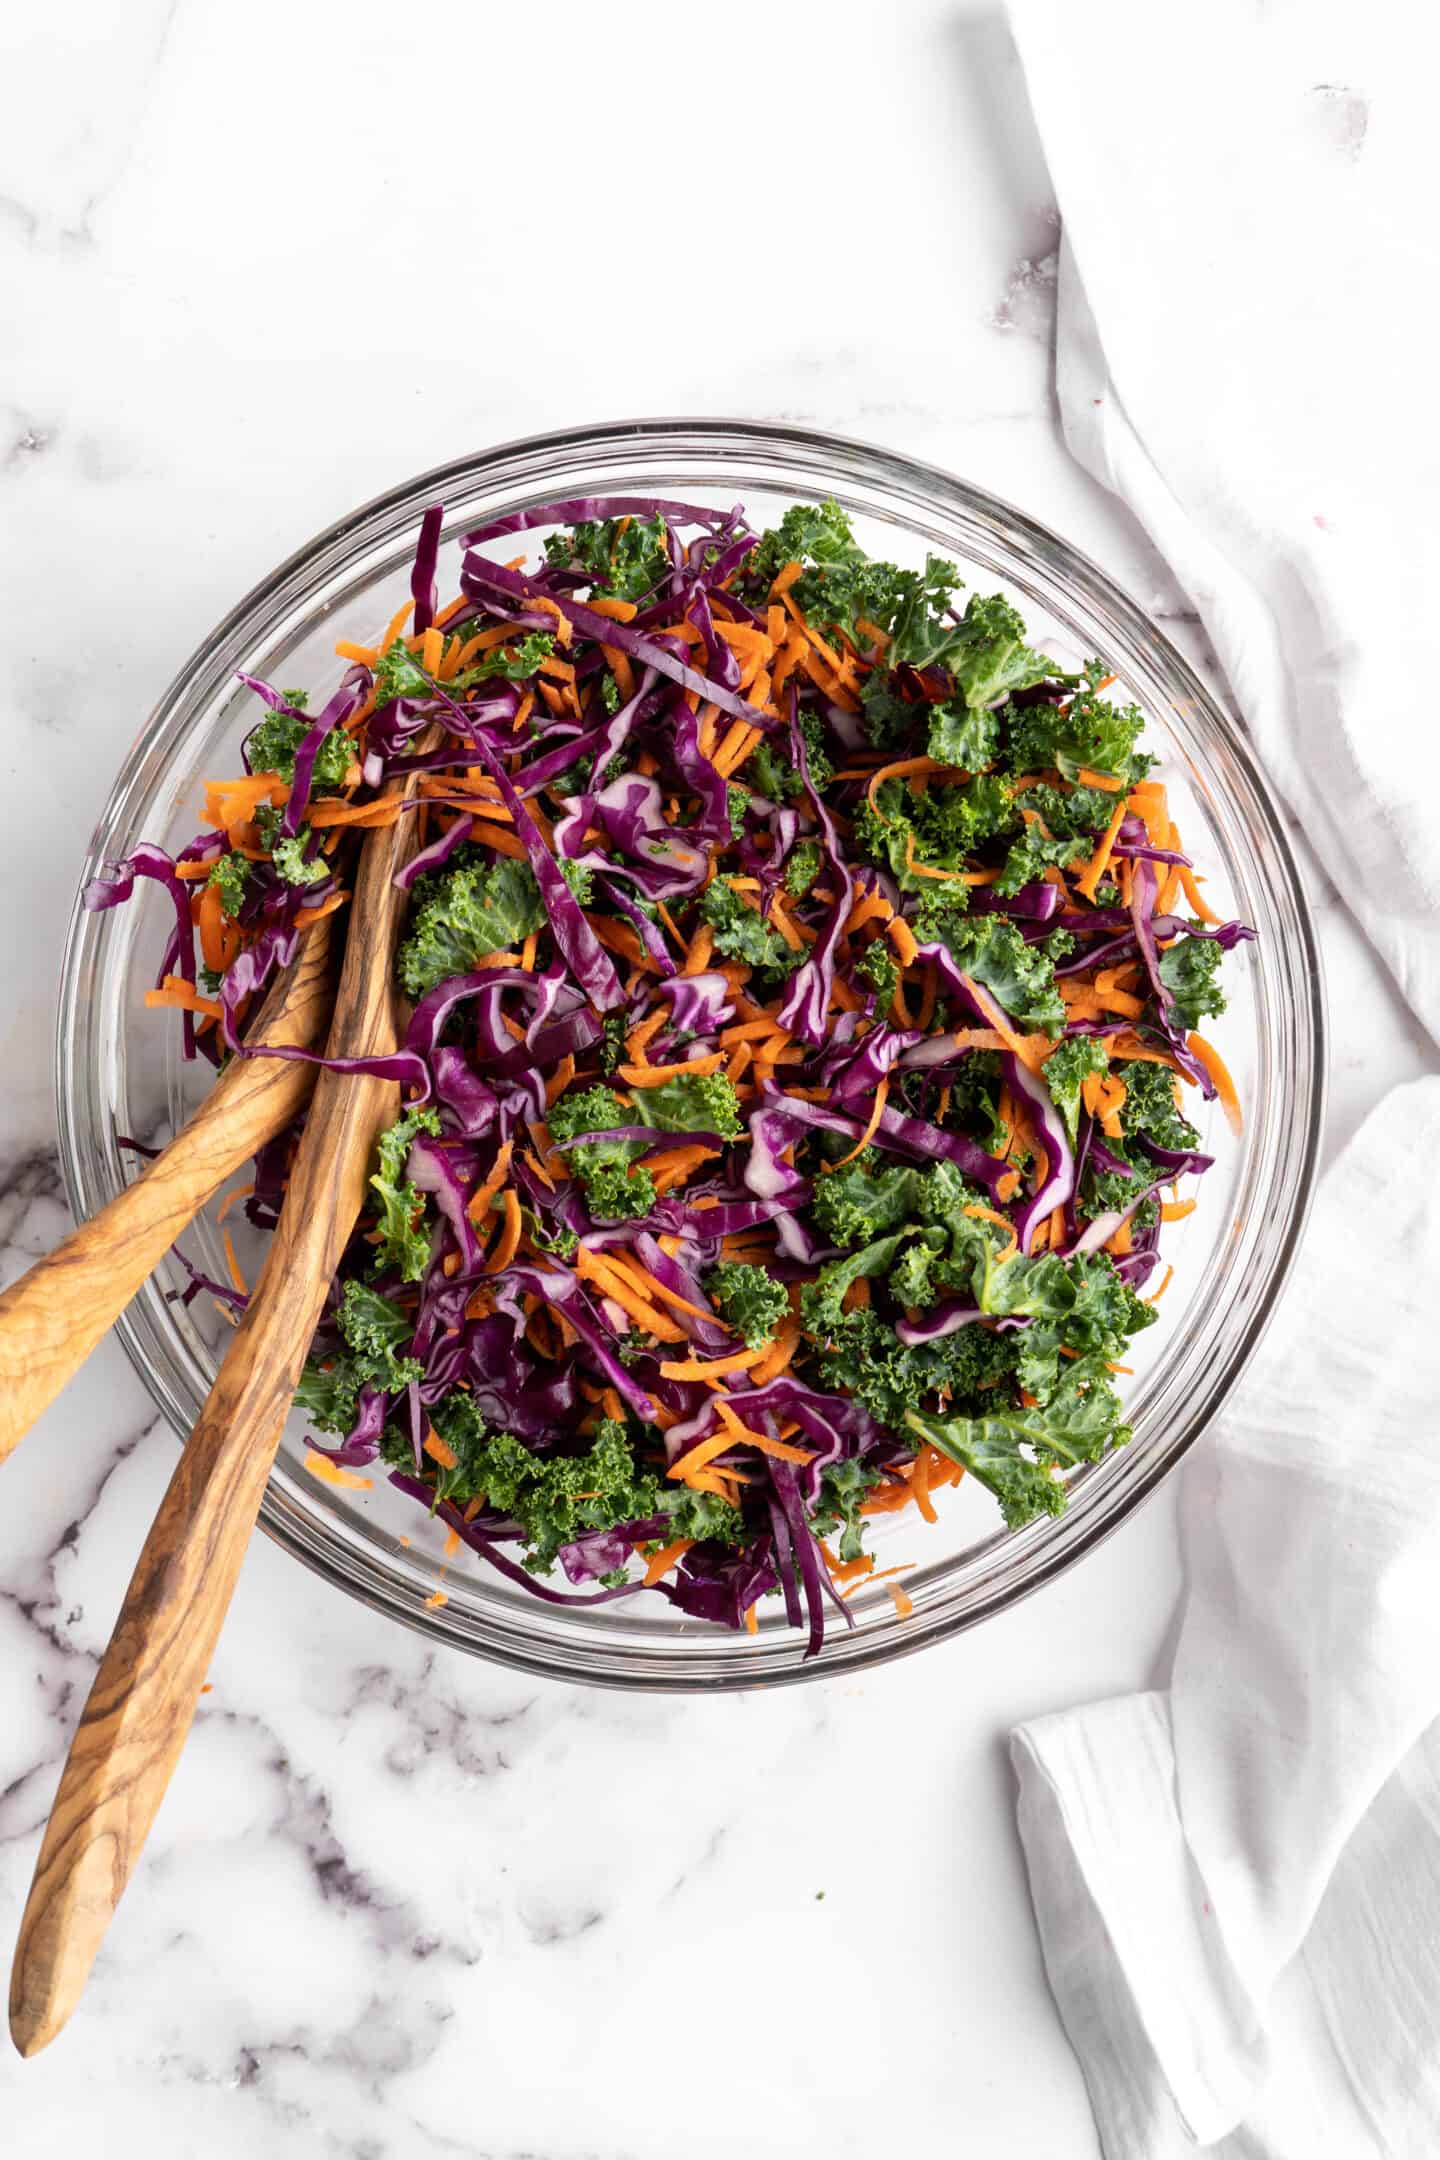 Overhead view of healthy coleslaw in glass bowl